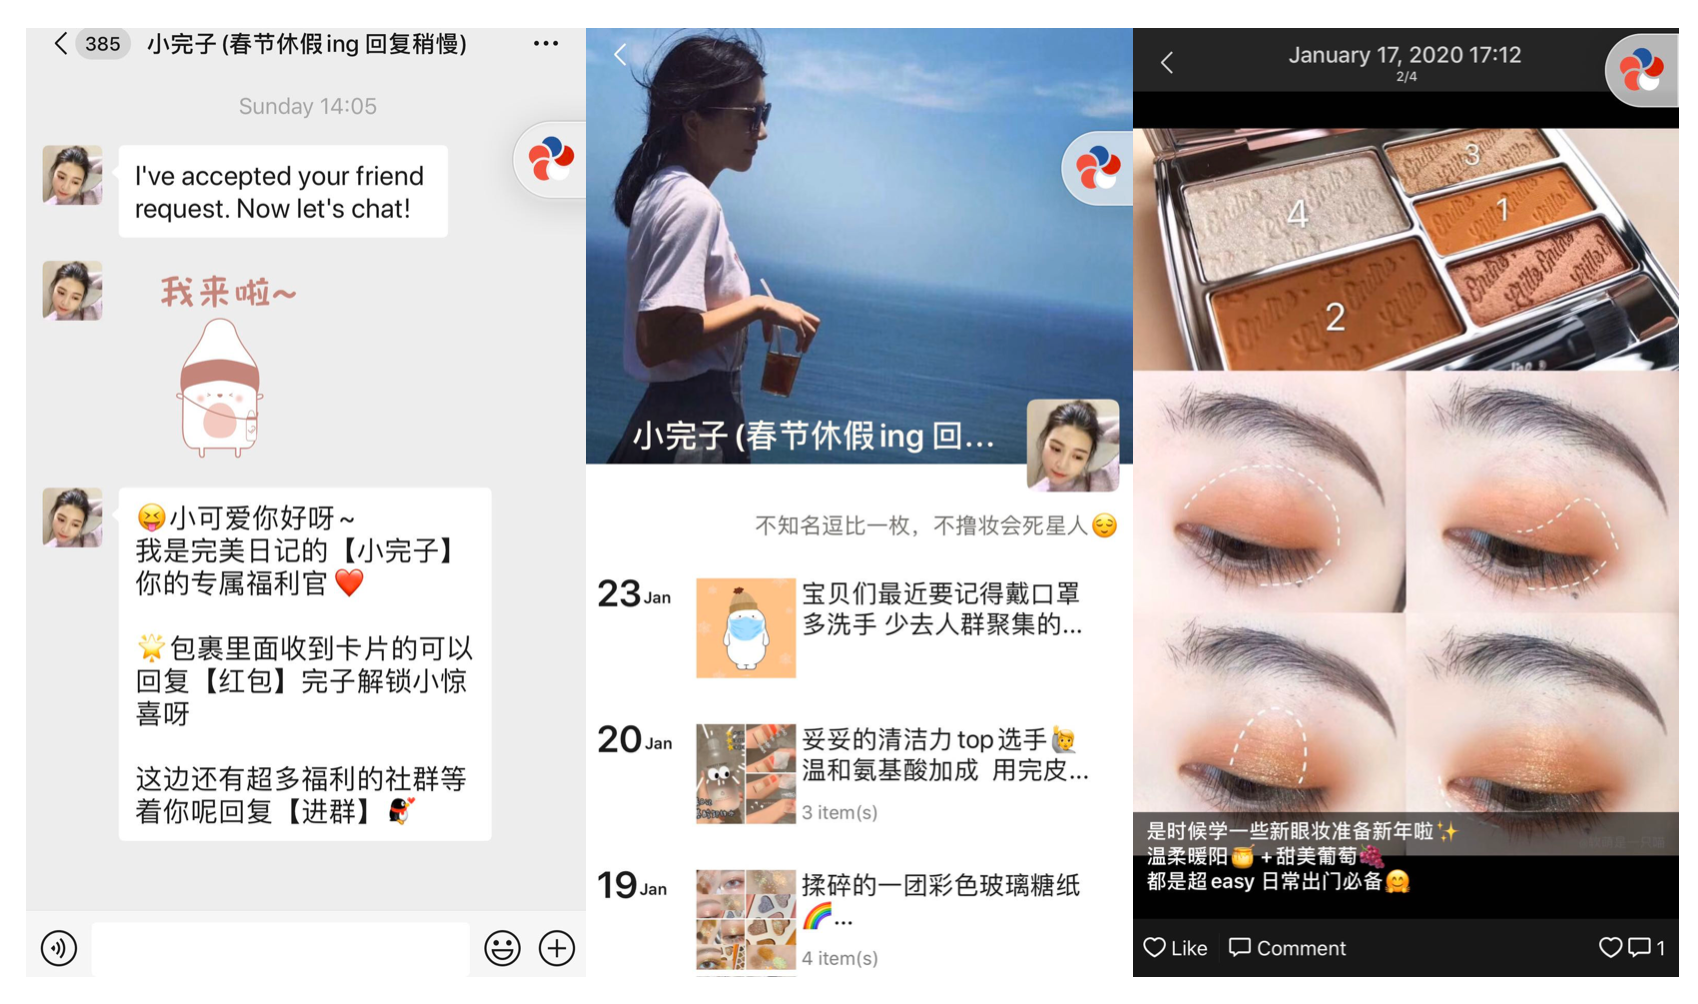 Once a friend is added on WeChat, the virtual avatar sends discount codes and shares makeup tutorials on her moments. Photo: screenshots/WeChat